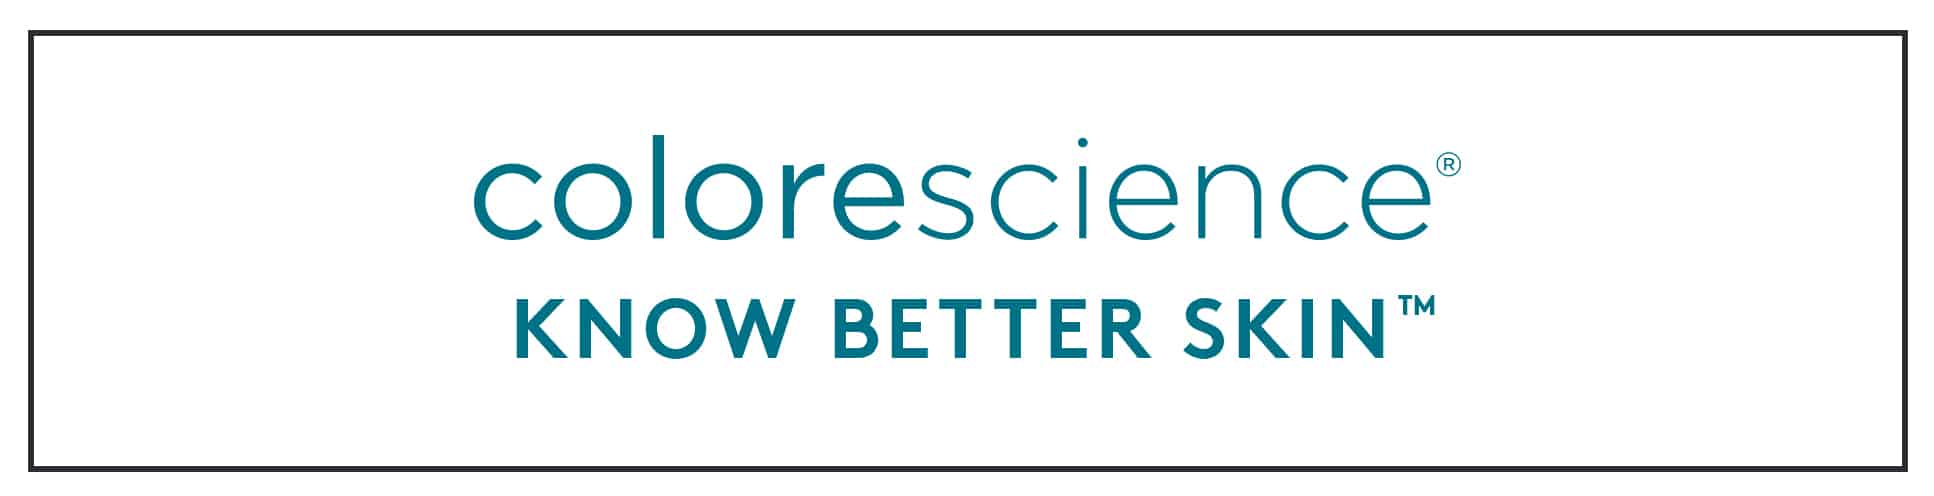 The logo for colorescience know better skin.